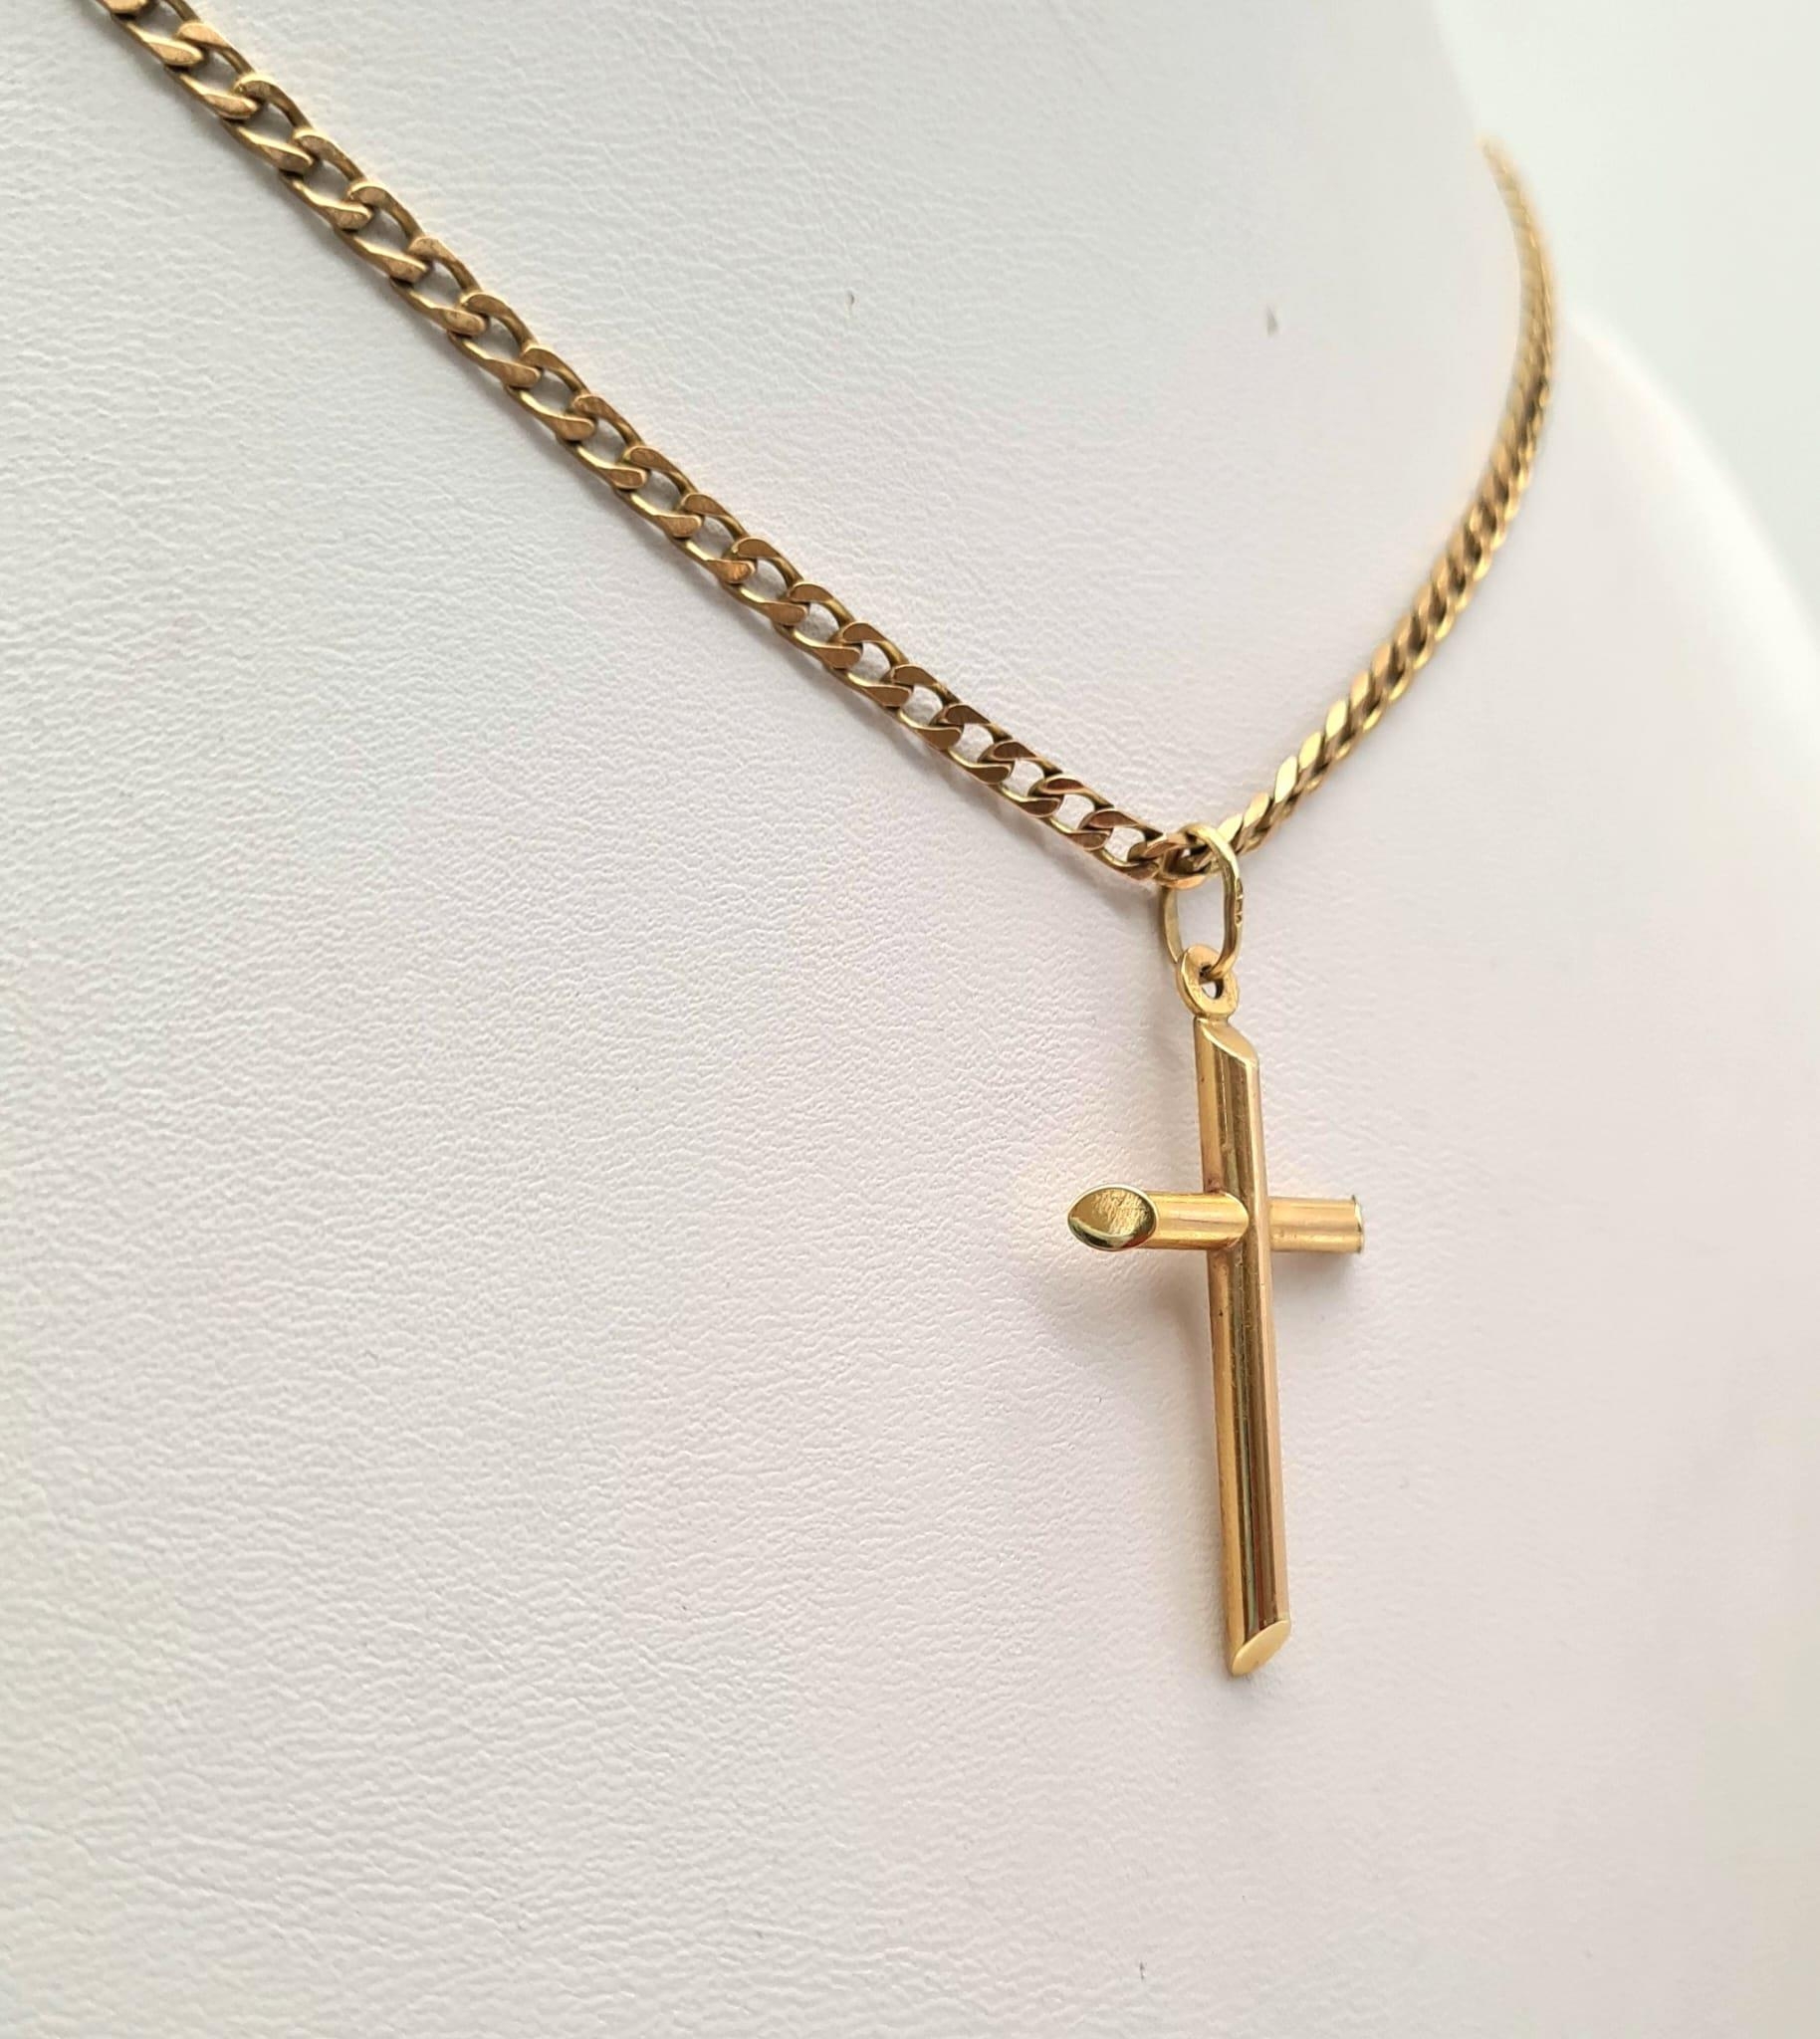 A 9K Yellow Gold Link Chain with Cross Pendant. 4 and 60cm. 11.05g total weight. Ref - 3287. - Image 2 of 6